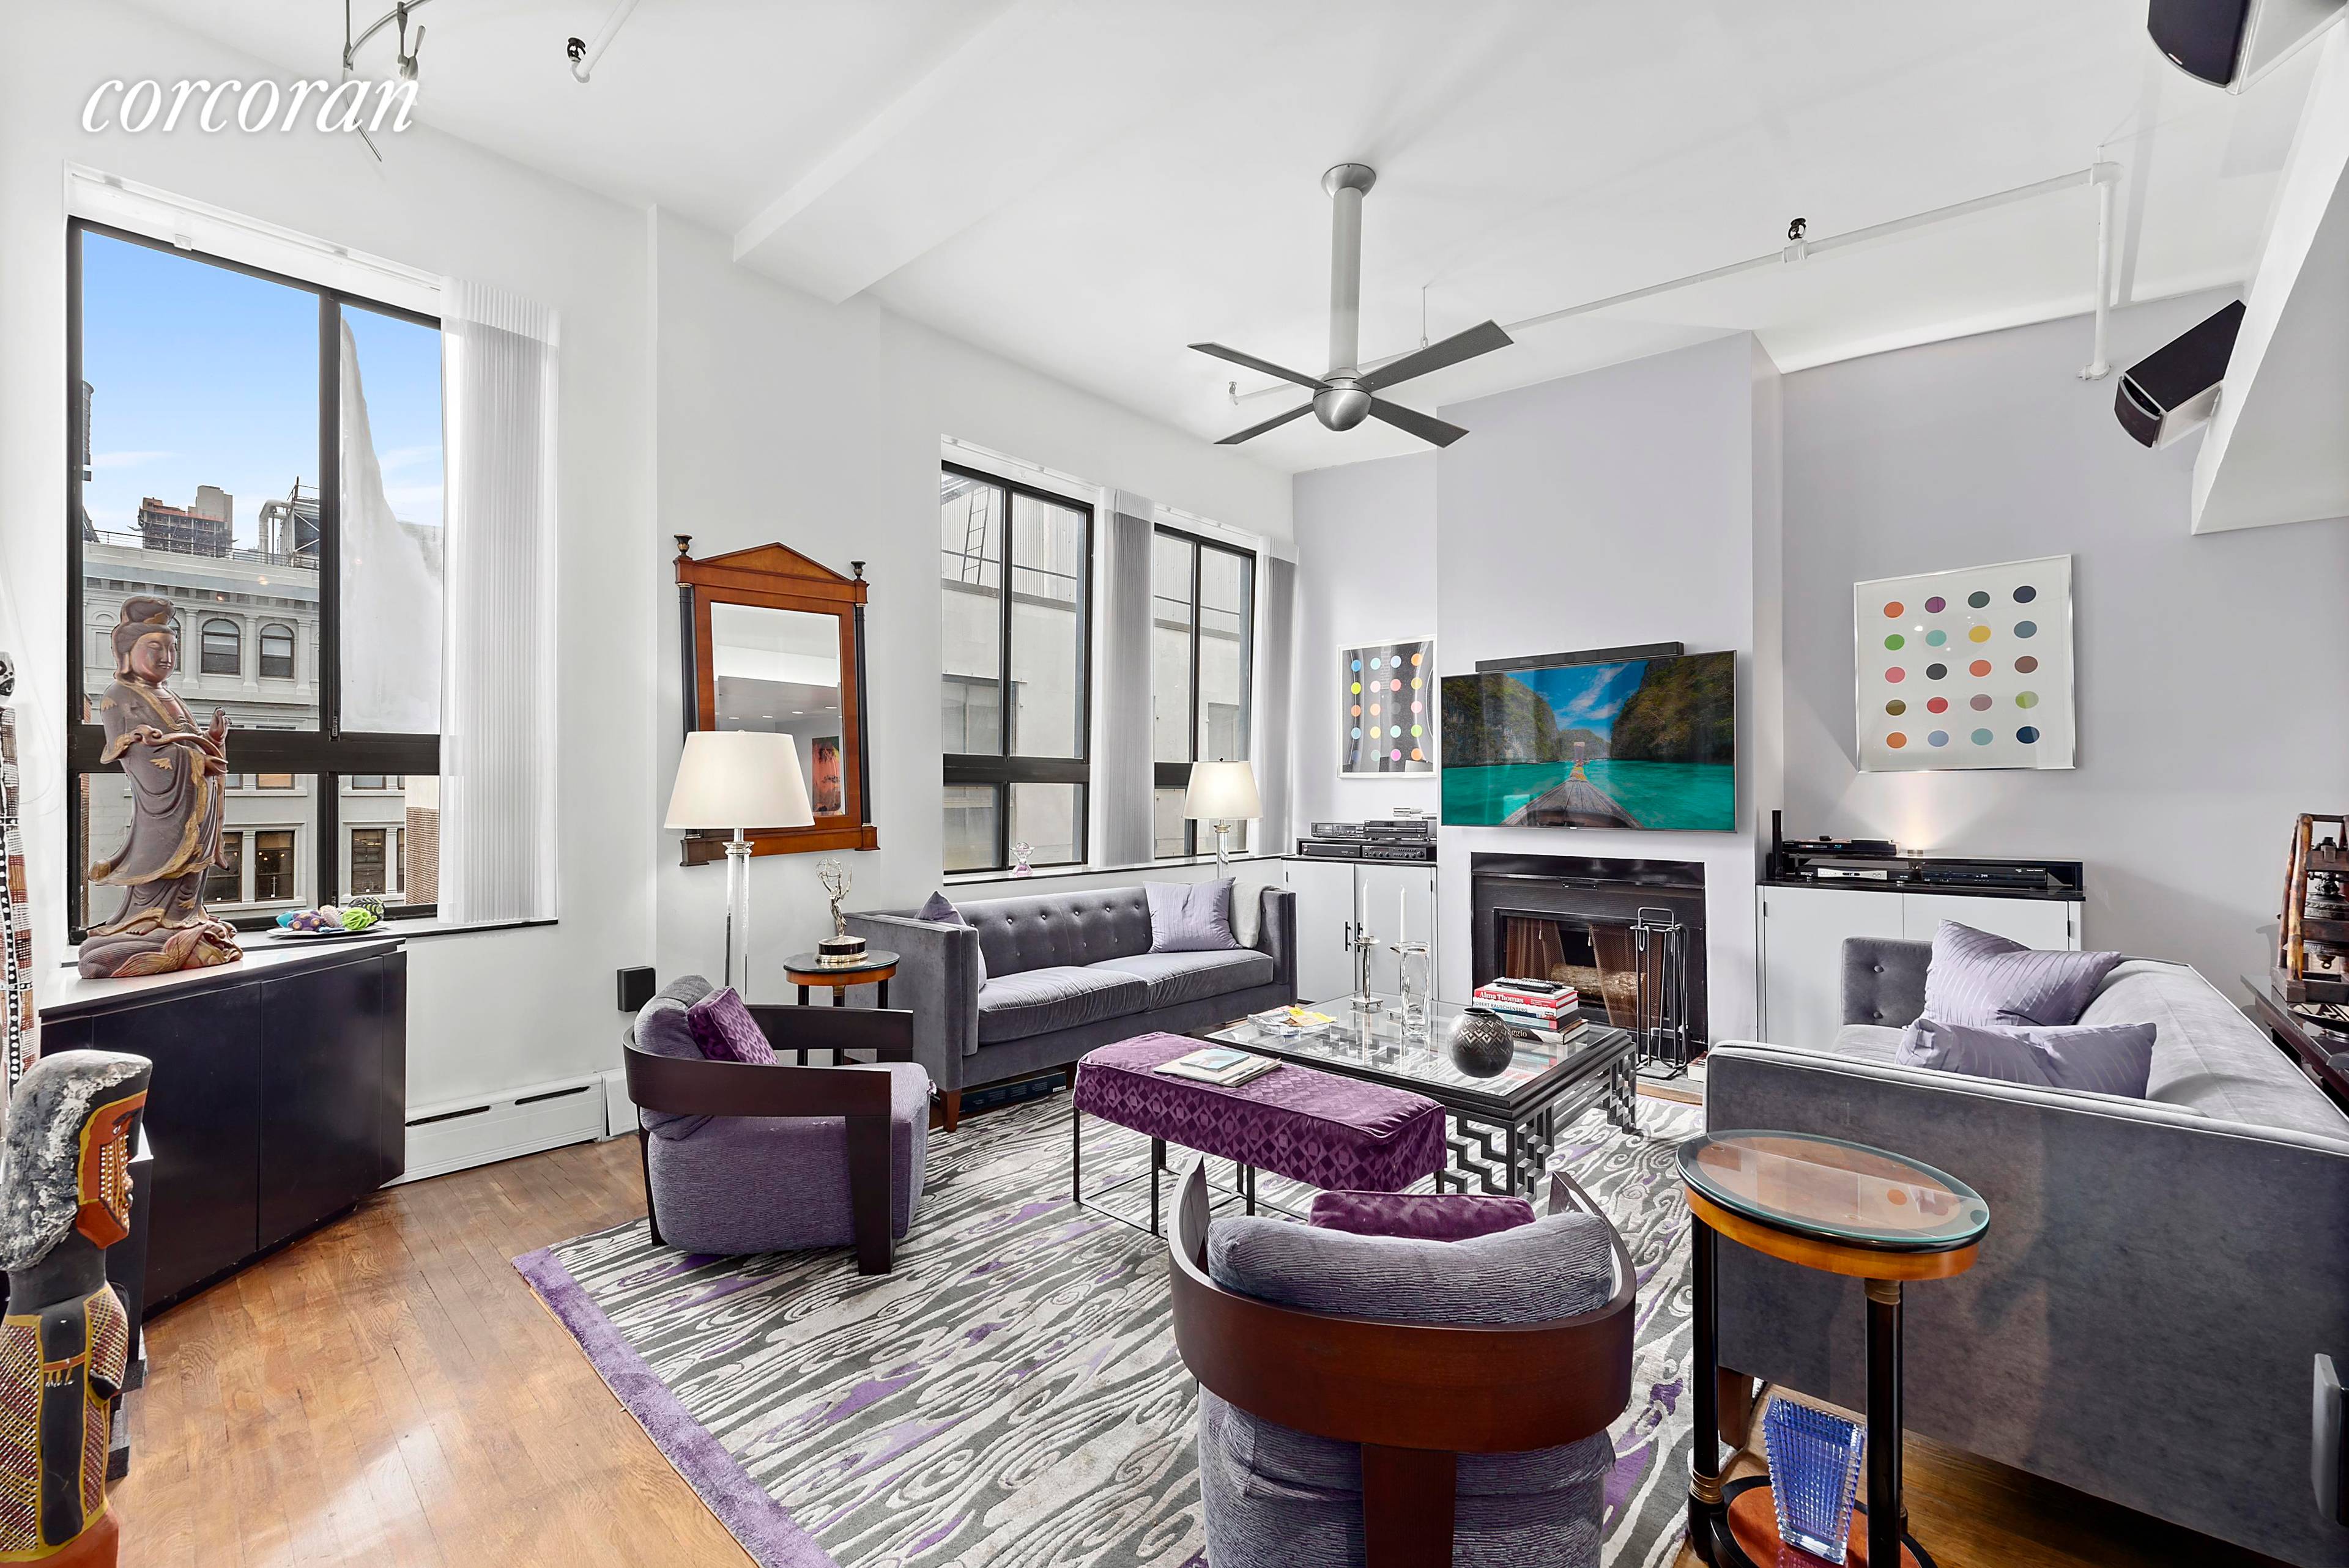 WHEN OPPORTUNITY KNOCKS combine two Penthouse Lofts creating one sprawling PH totaling over 3, 000 sqft interior space amp ; 1, 000 sqft of outdoor space.